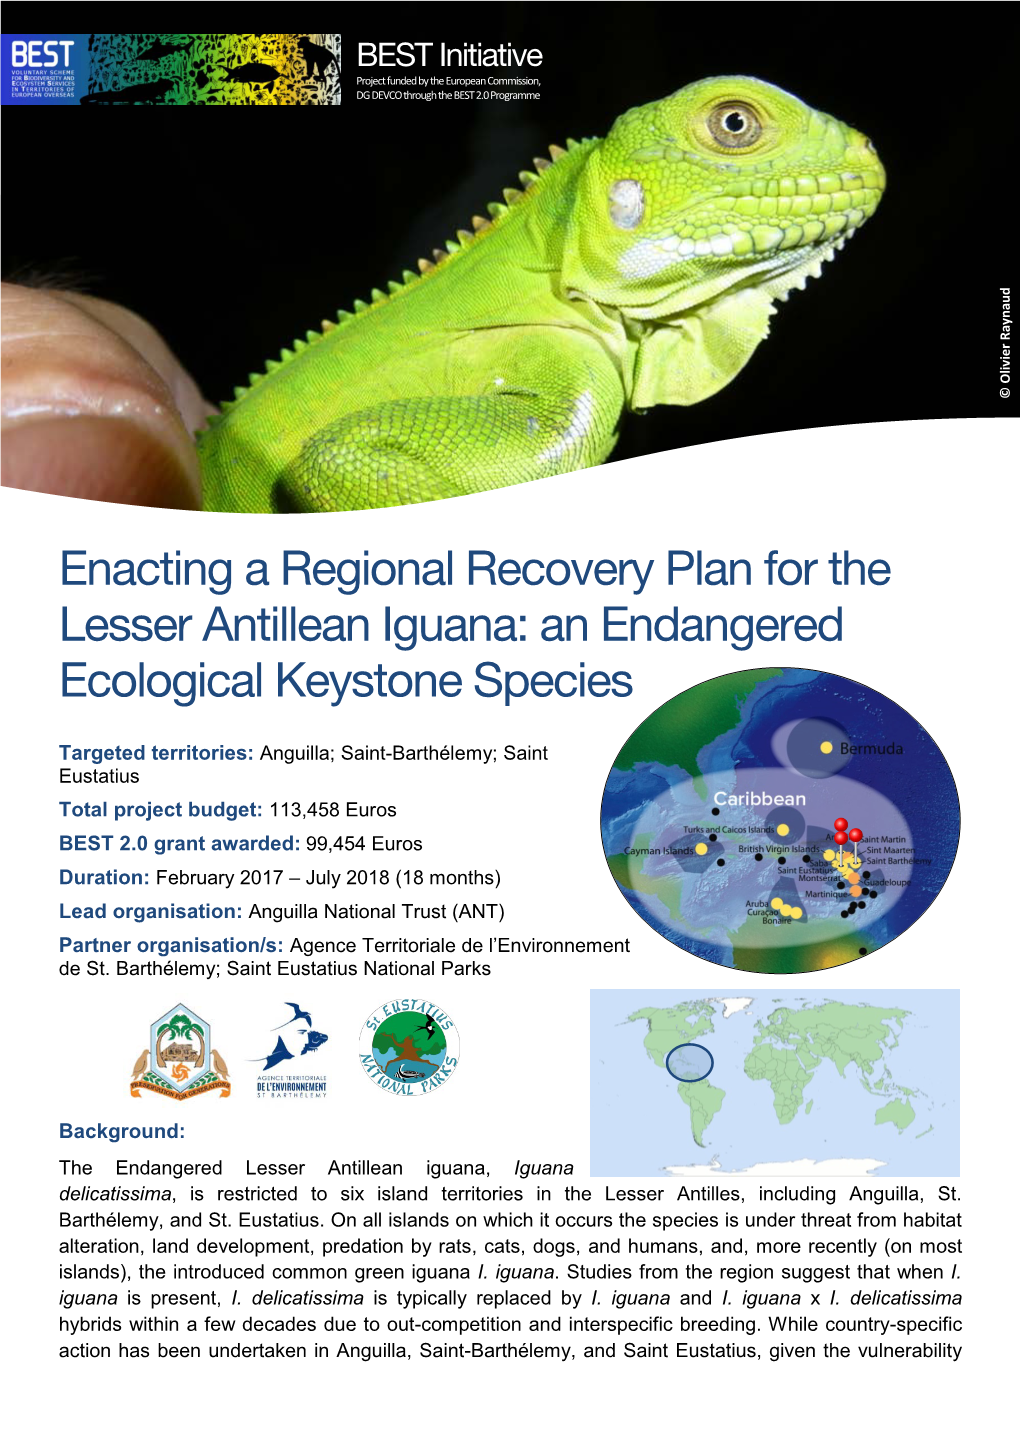 Enacting a Regional Recovery Plan for the Lesser Antillean Iguana: an Endangered Ecological Keystone Species